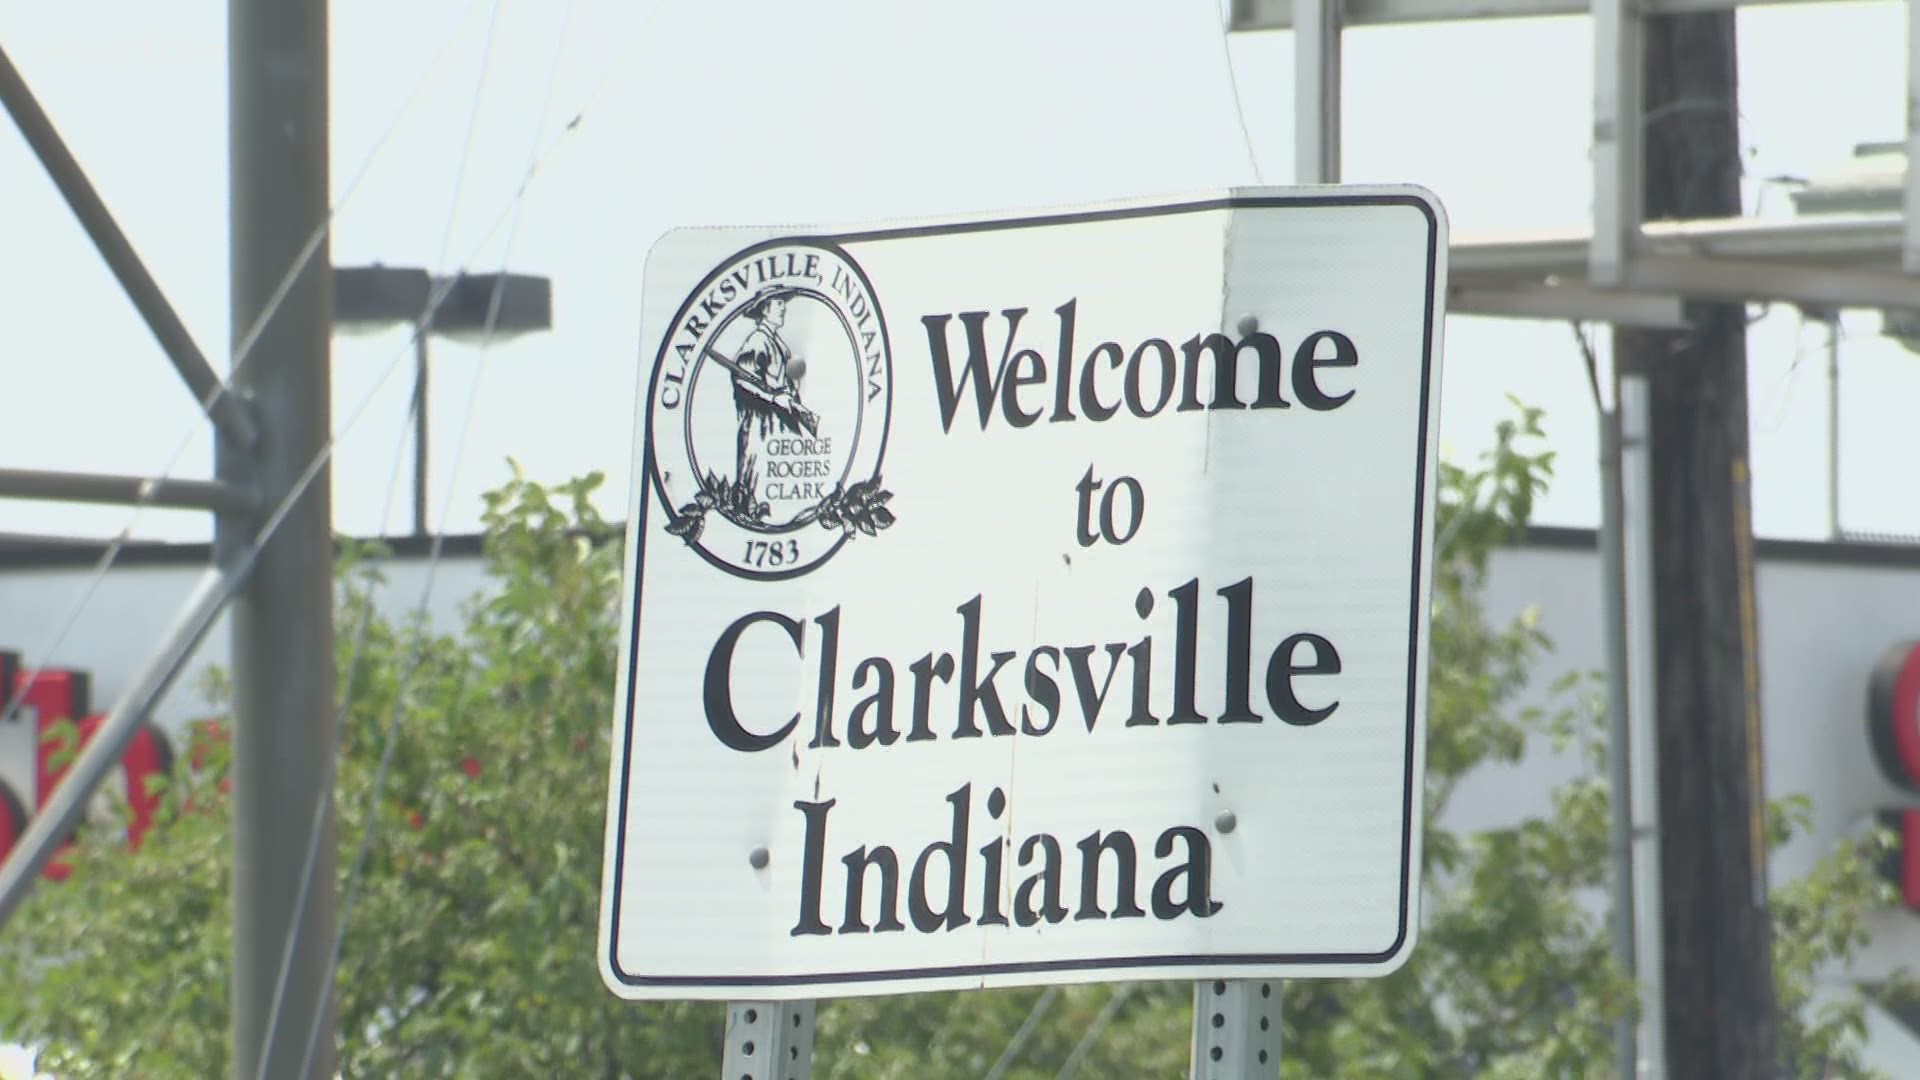 Clarksville is one of the hottest places in Indiana---and that's why they implemented the 'Beat the Heat' program---to cool the town down and save lives.